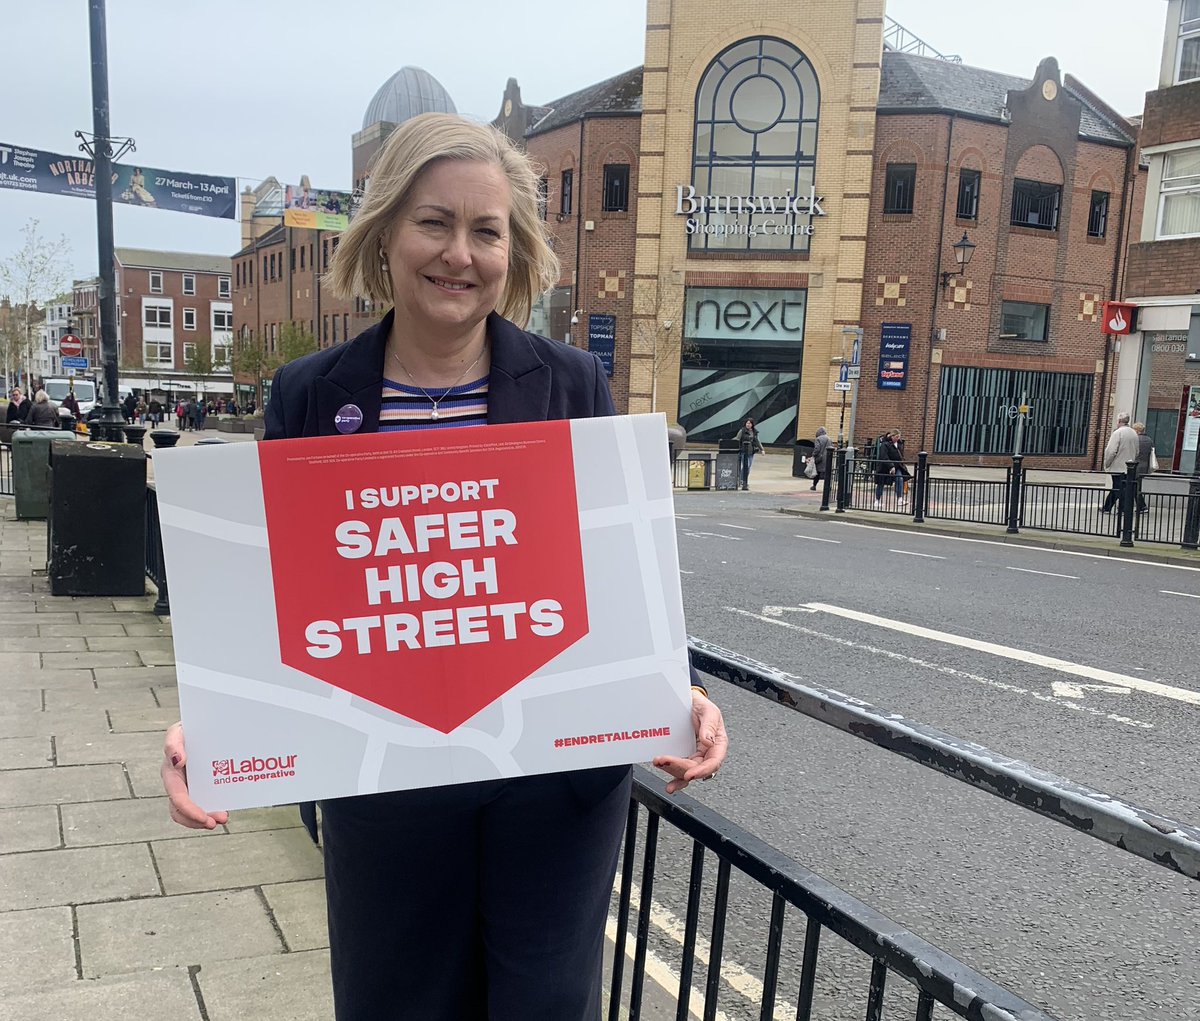 Nobody should be afraid to work or to shop on their local high street but our shopworkers face awful levels of violence and abuse. @UKLabour @CoopParty will scrap the Tories’ Shoplifter Charter & bring in 13,000 more neighbourhood police & PCSOs. #SaferHighStreets #EndRetailCrime…